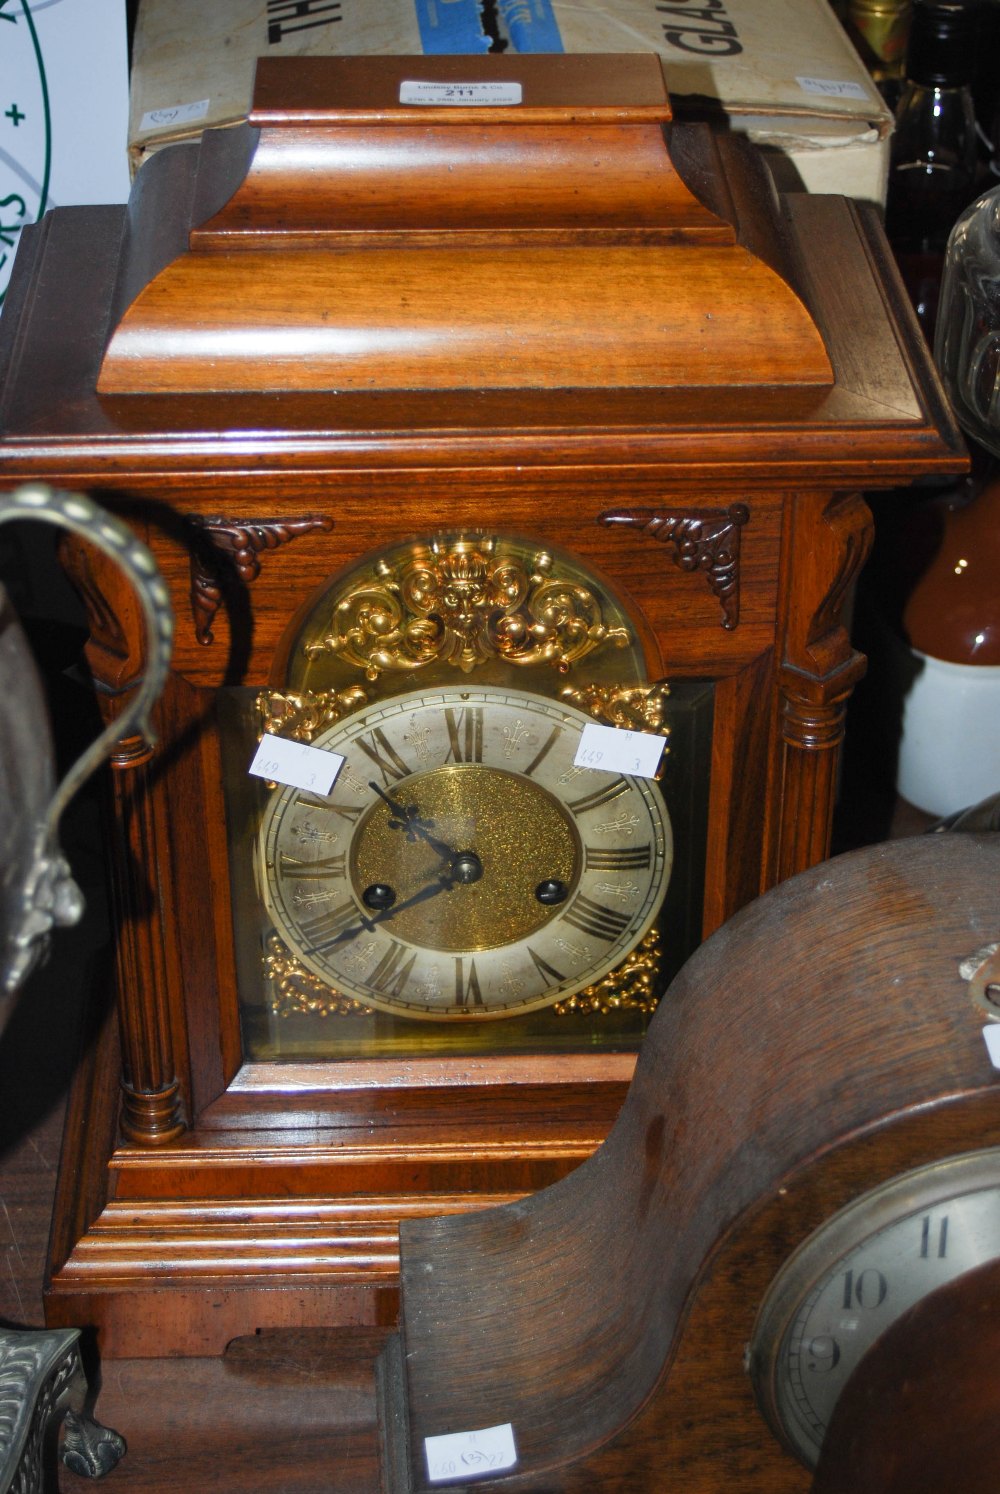 EARLY 20TH CENTURY CONTINENTAL BRACKET/TABLE CLOCK, THE BRASS TWIN TRAIN MOVEMENT STRIKING THE